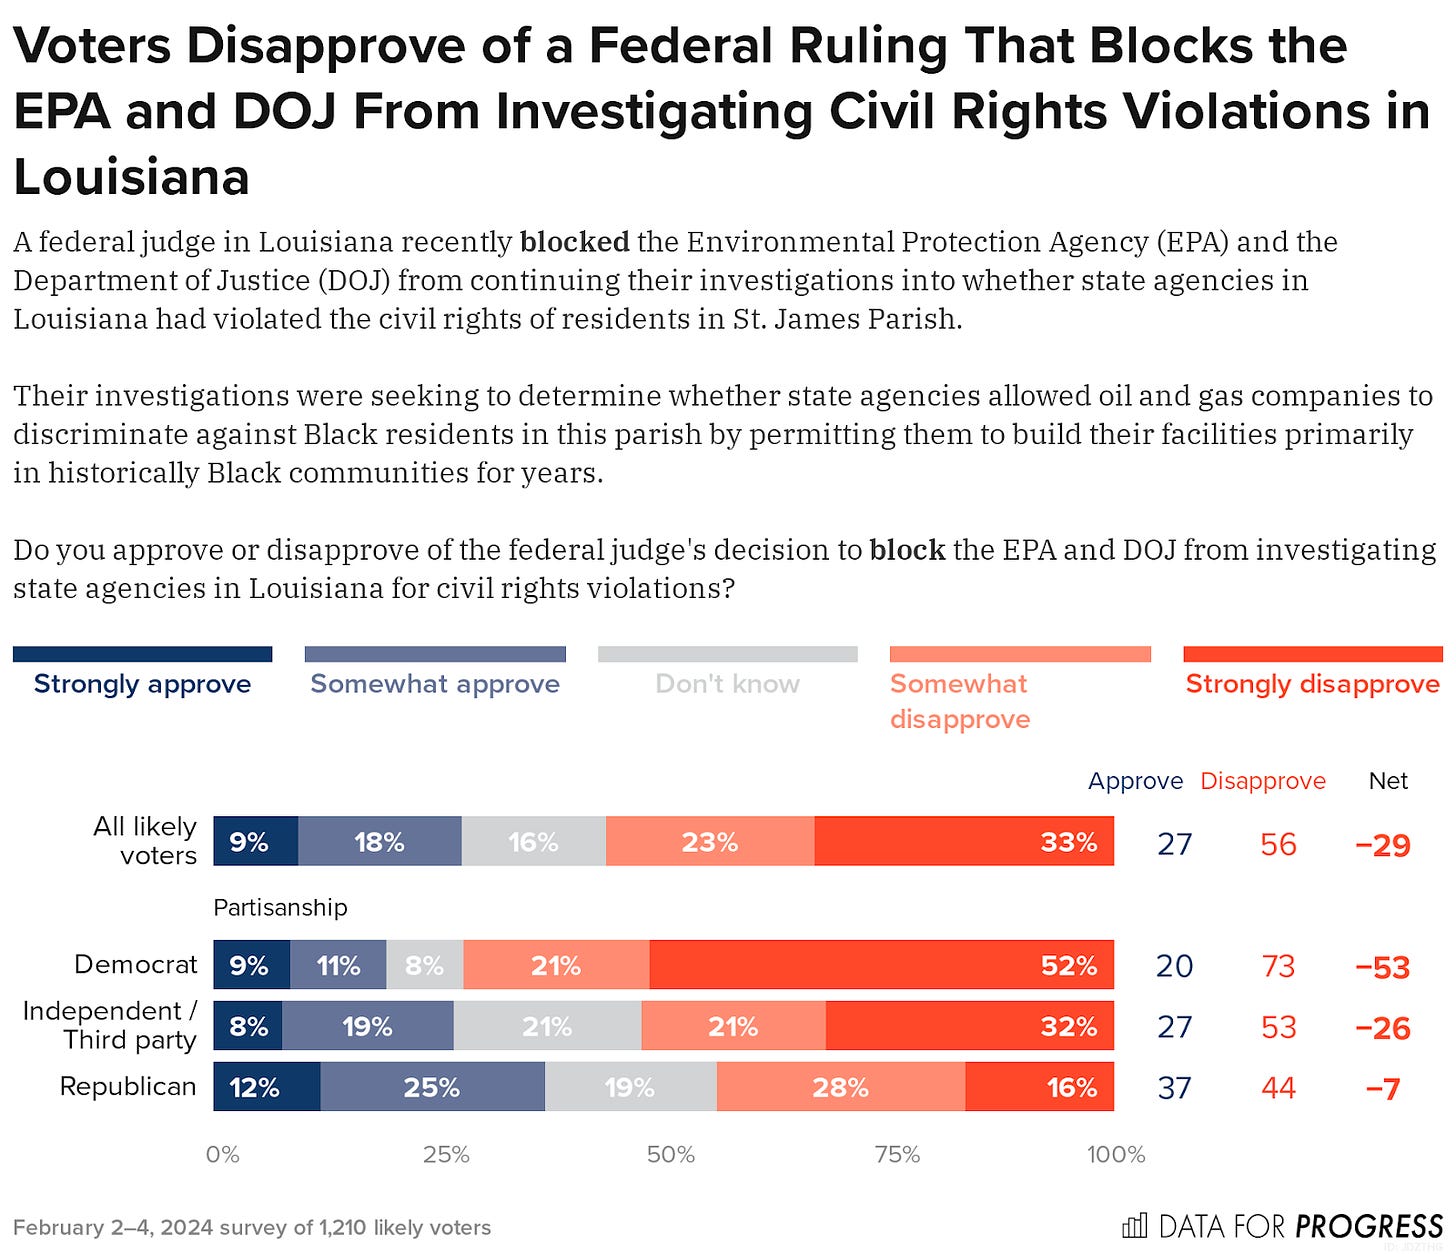 Bar chart of polling data from Data For Progress. Title: Voters Disapprove of a Federal Ruling That Blocks the EPA and DOJ From Investigating Civil Rights Violations in Louisiana. Description: A federal judge in Louisiana recently blocked the Environmental Protection Agency (EPA) and the Department of Justice (DOJ) from continuing their investigations into whether state agencies in Louisiana had violated the civil rights of residents in St. James Parish. Their investigations were seeking to determine whether state agencies allowed oil and gas companies to discriminate against Black residents in this parish by permitting them to build their facilities primarily in historically Black communities for years. Do you approve or disapprove of the federal judge's decision to block the EPA and DOJ from investigating state agencies in Louisiana for civil rights violations? All likely voters — Approve: 28%, Disapprove: 56% Democrat — Approve: 19%, Disapprove: 72% Independent / Third party — Approve: 27%, Disapprove: 53% Republican — Approve: 37%, Disapprove: 44%  February 2–4, 2024 survey of 1,210 likely voters.